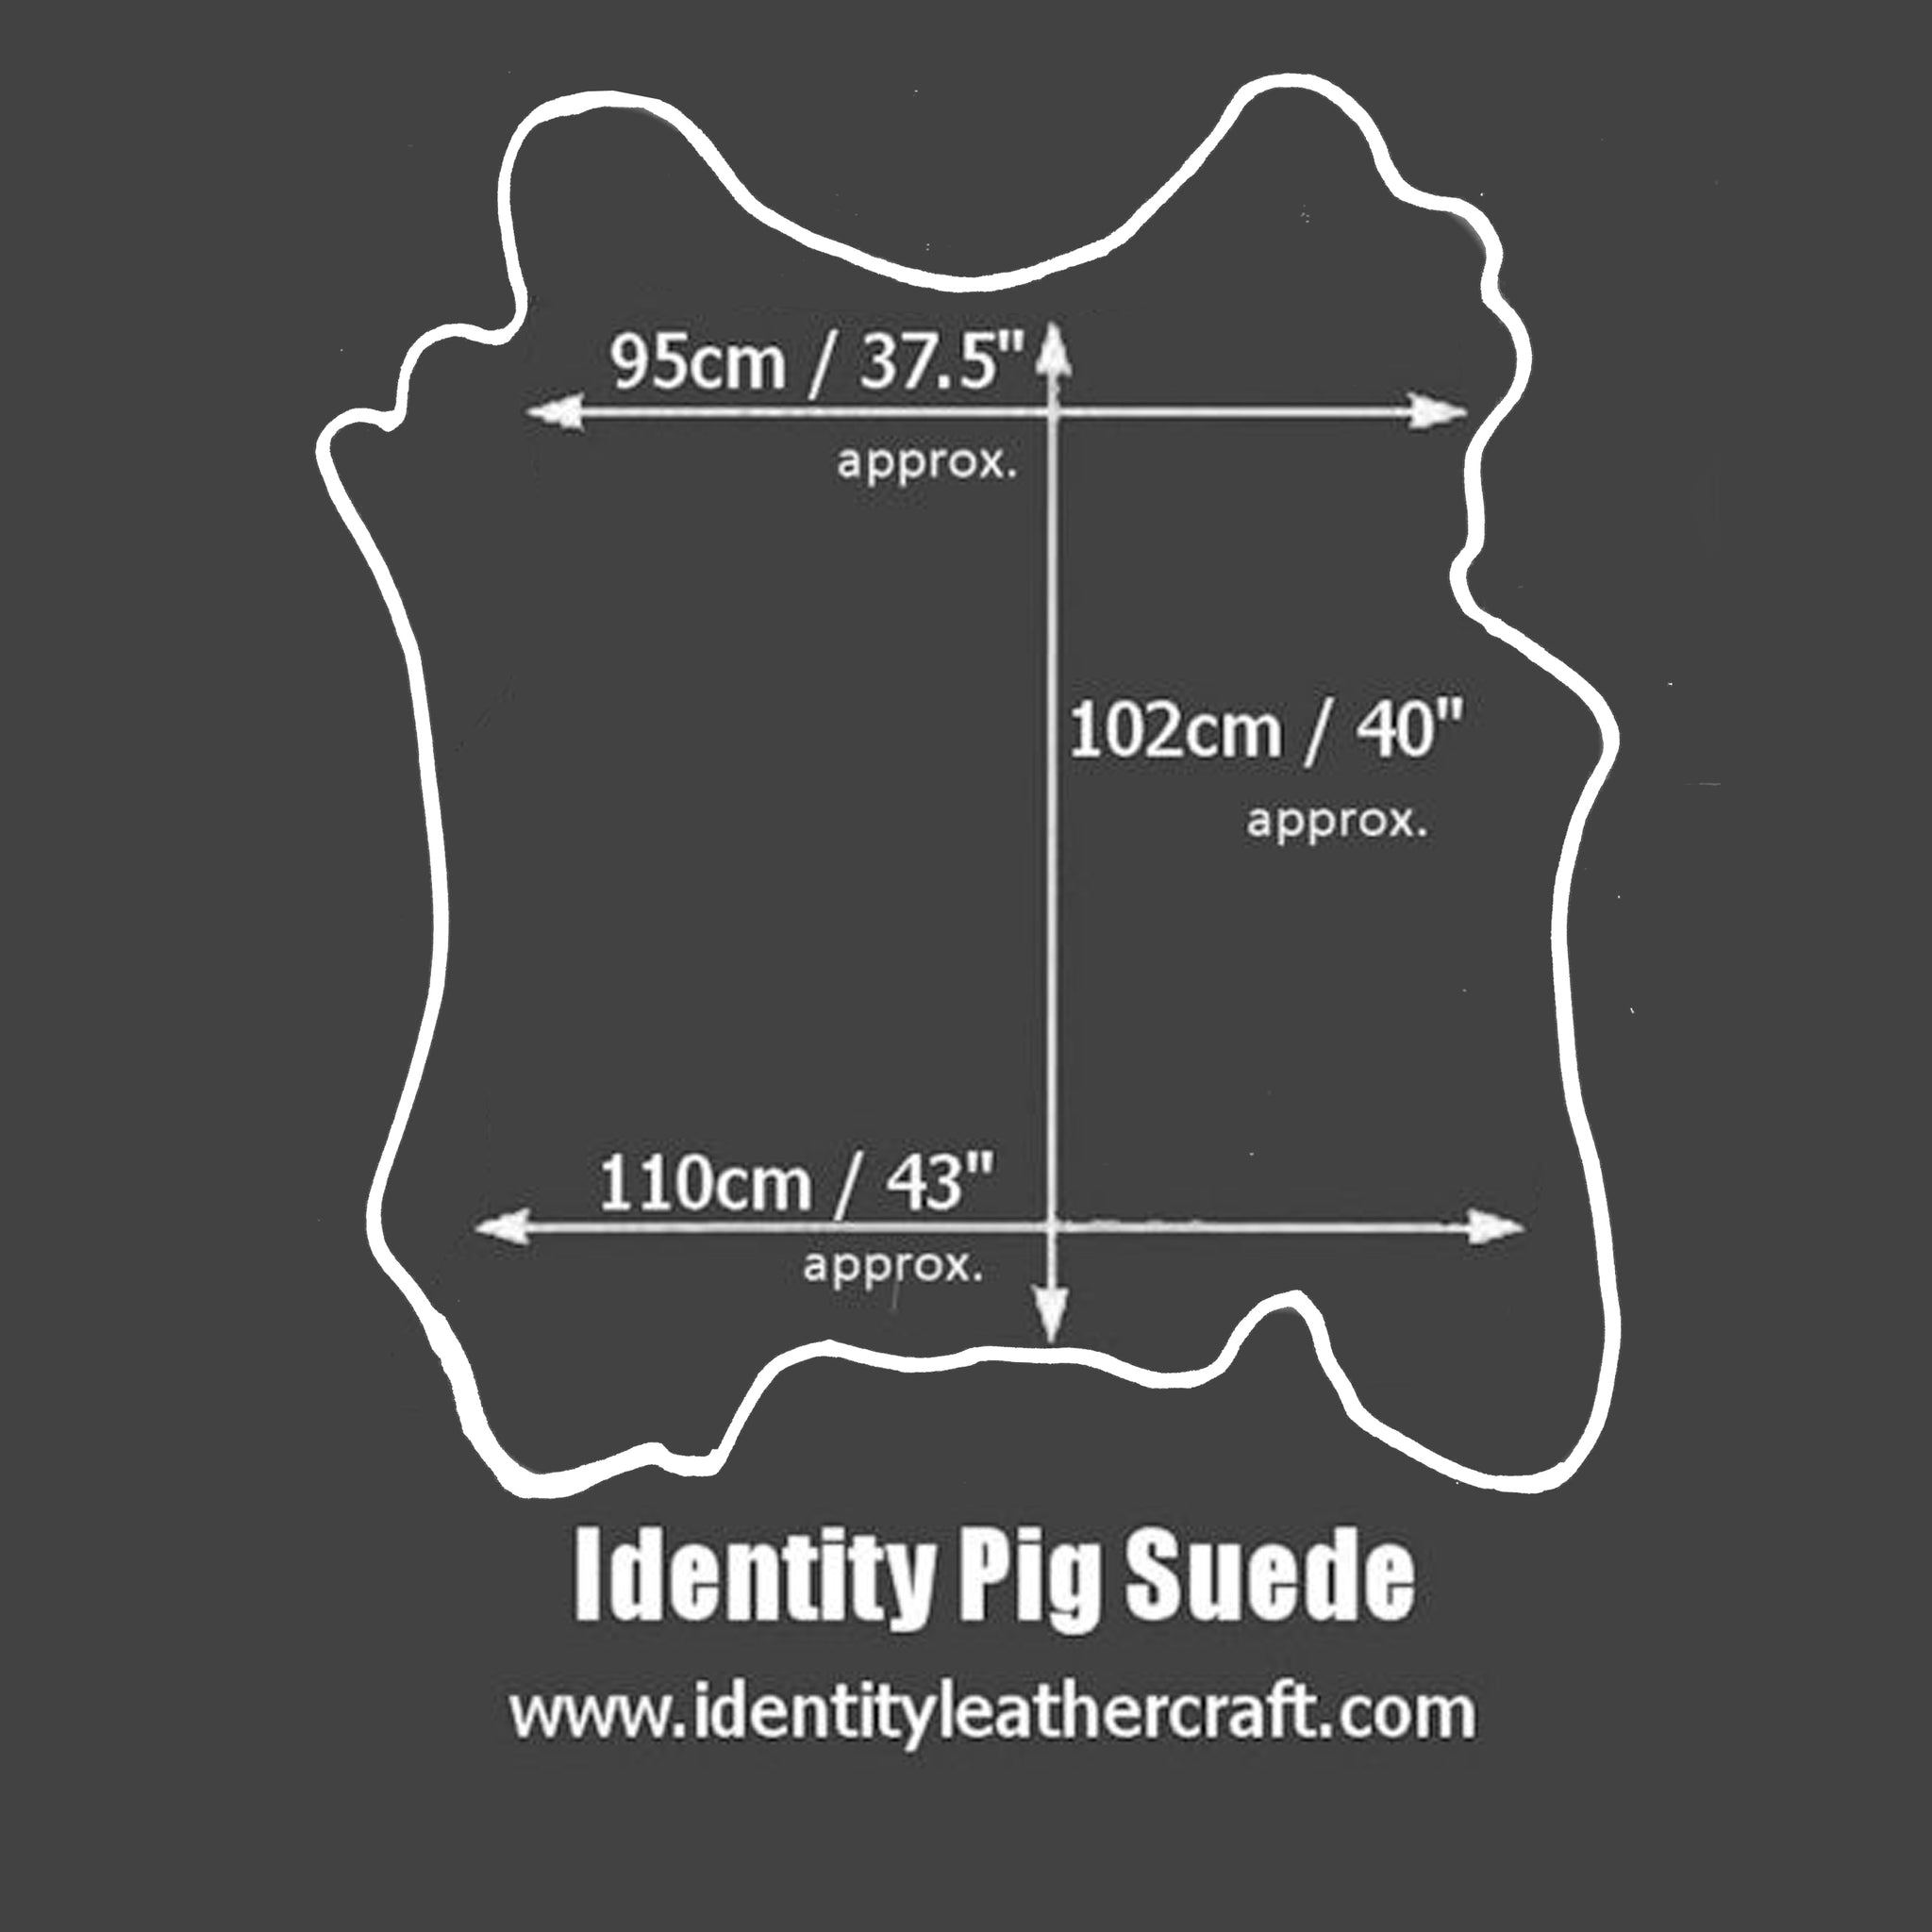 Identity Leathercraft Pig Suede Size Guide